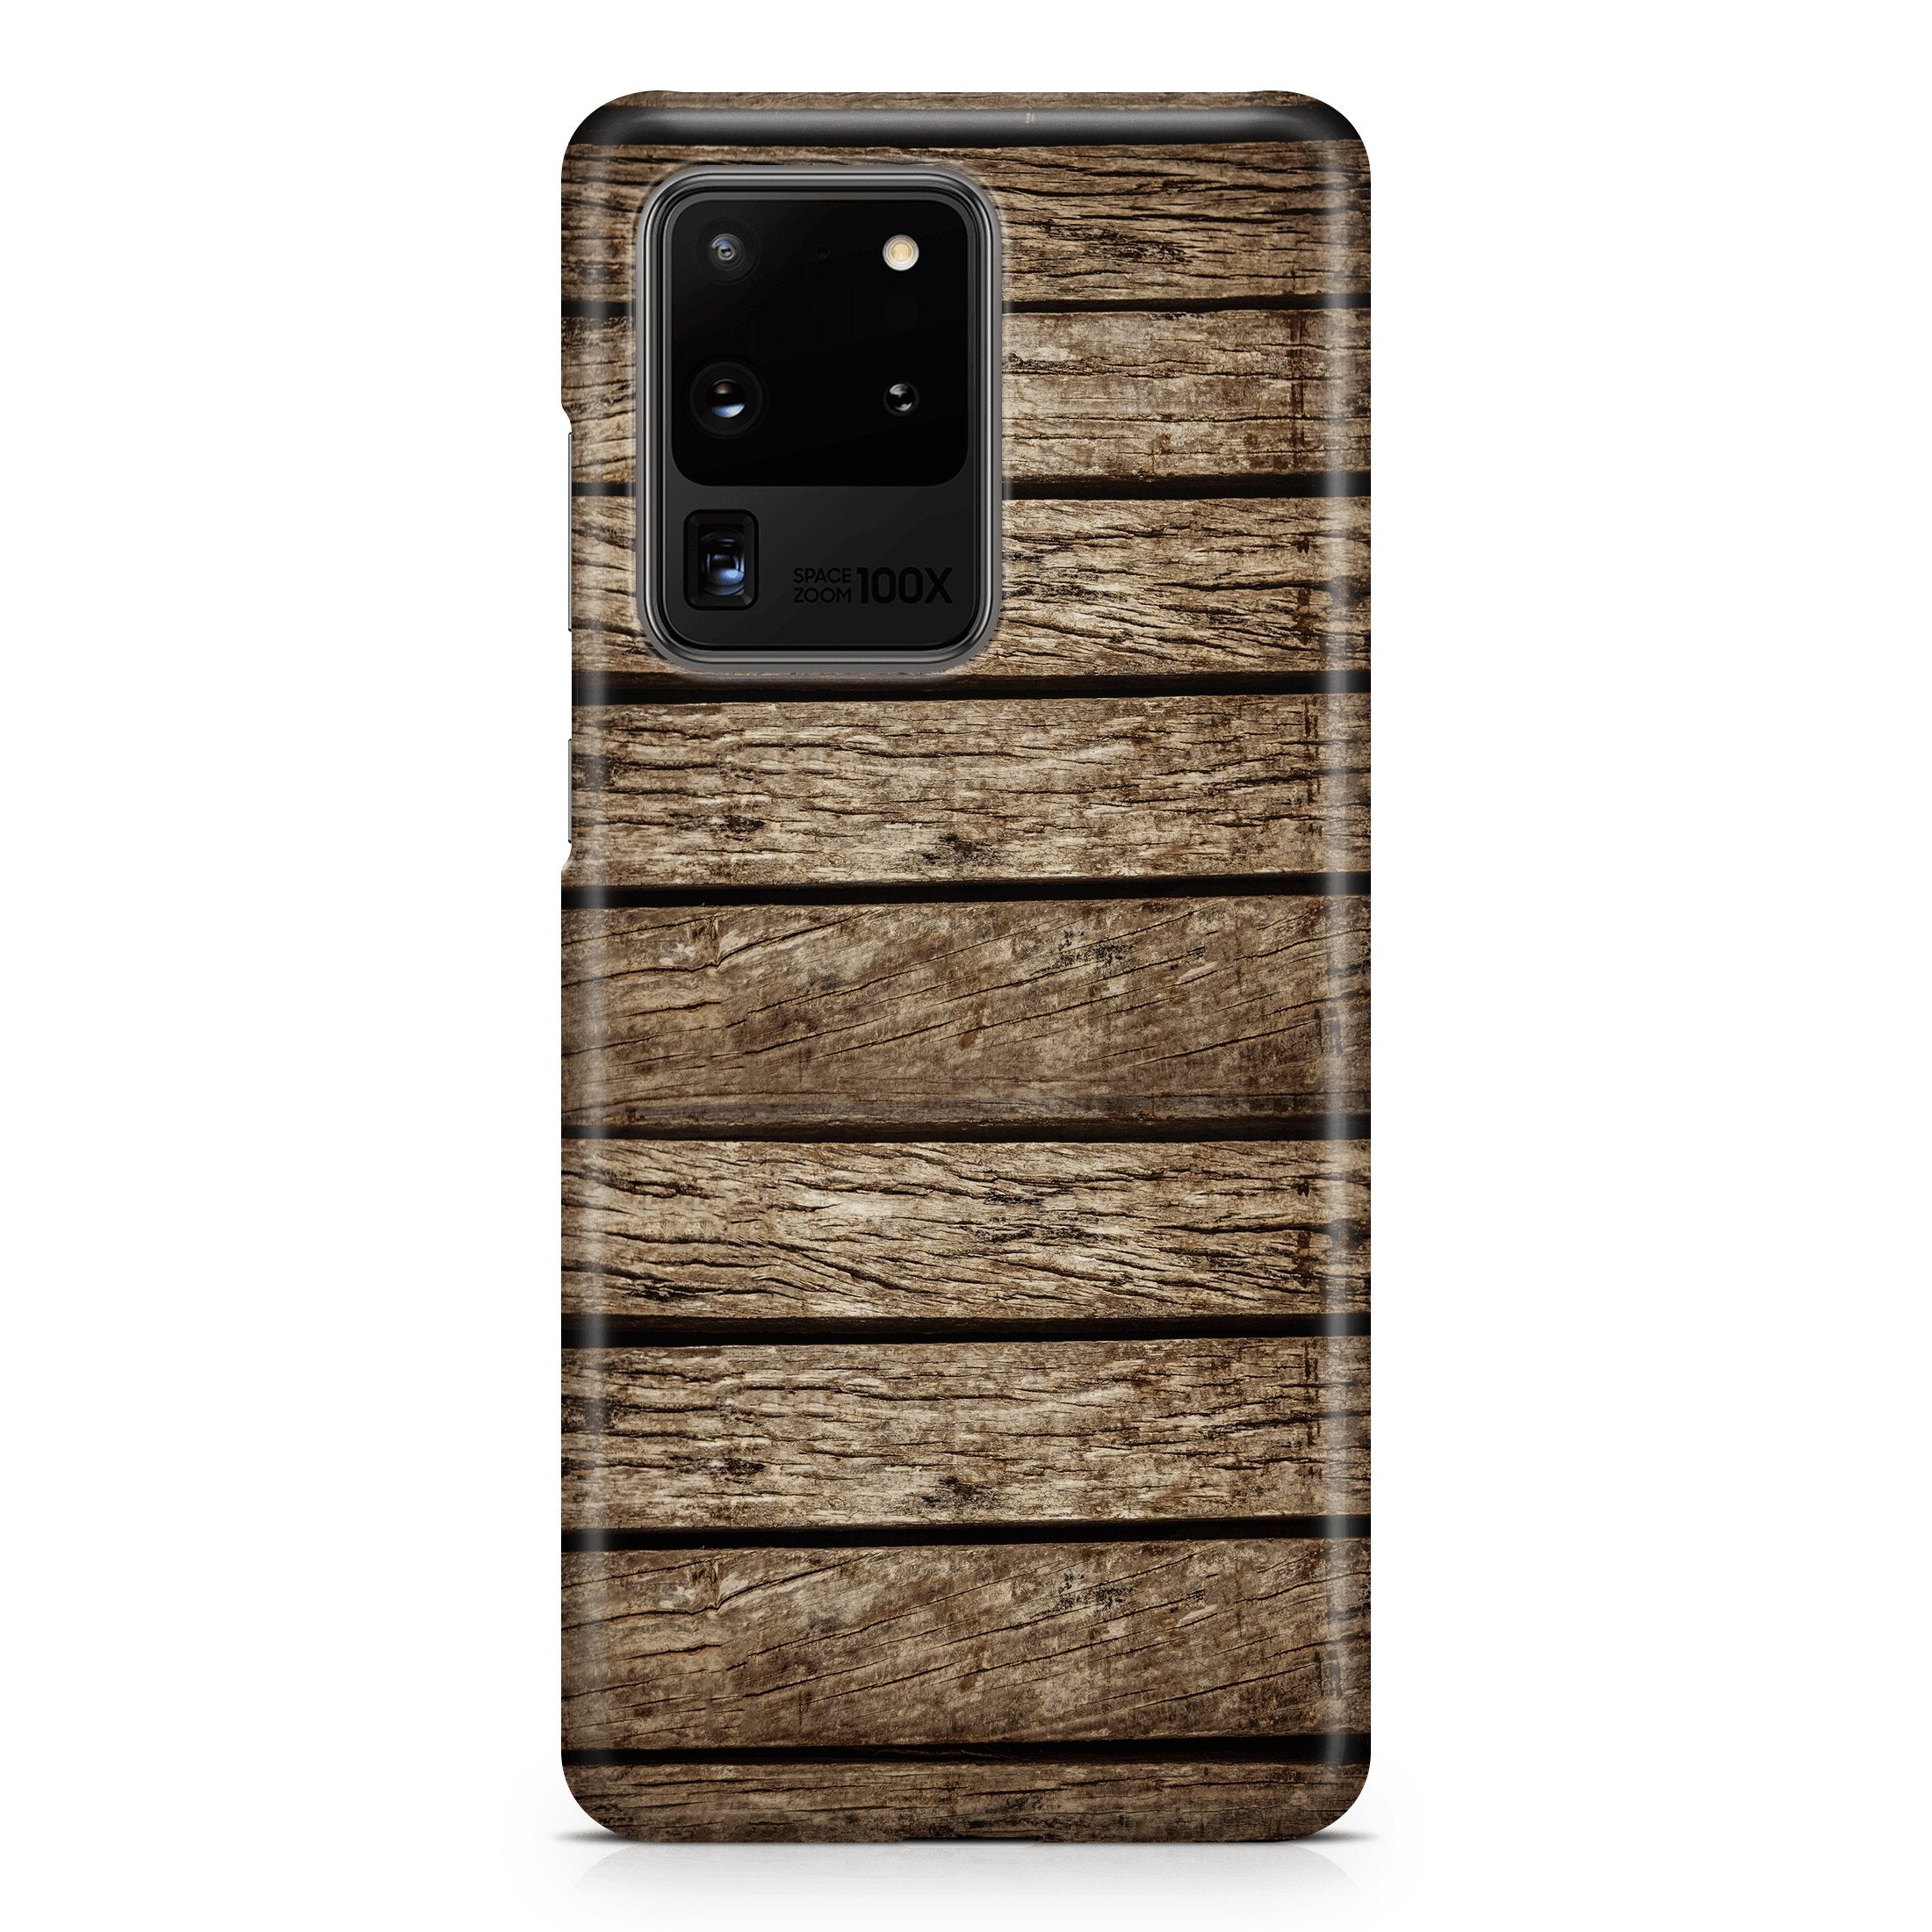 Rustic Cabin - Samsung phone case designs by CaseSwagger